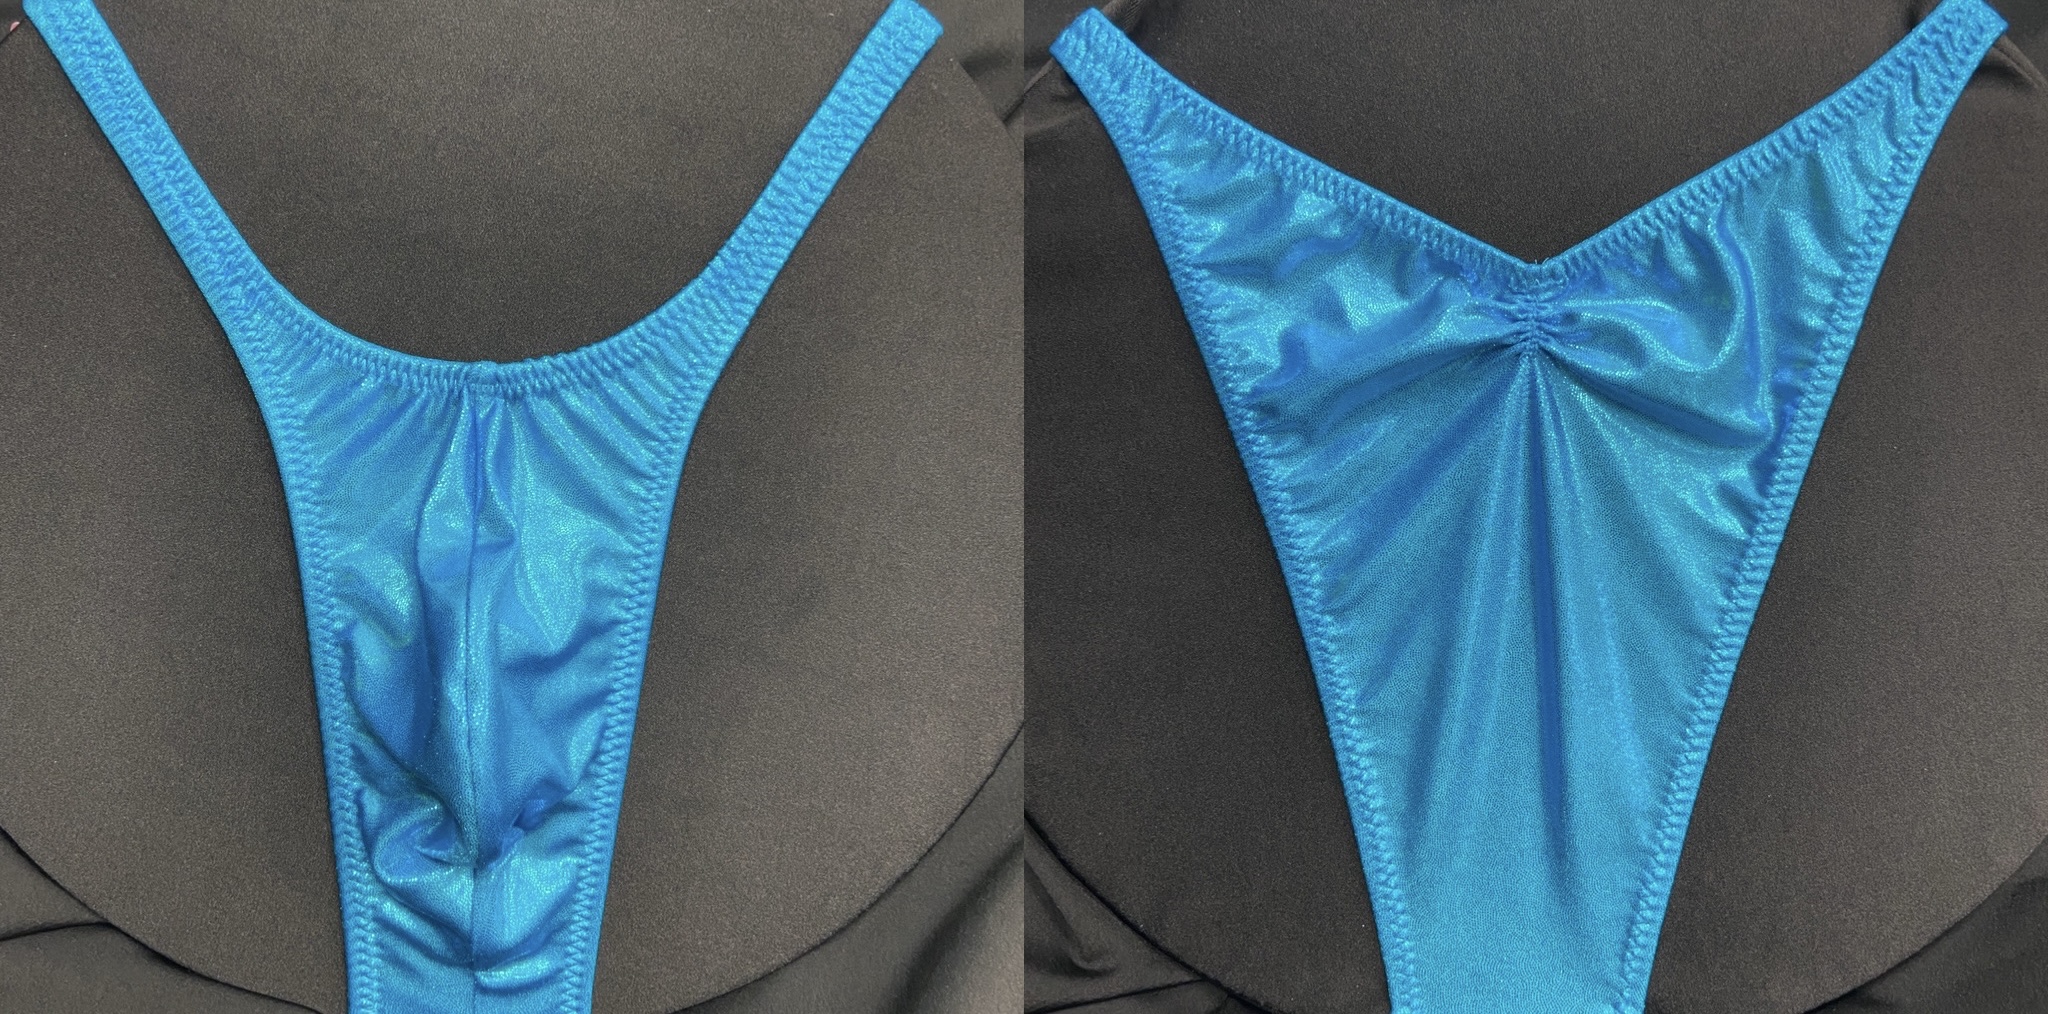 Aqua Shimmer Frost
Pro Cut 
available in S,M,L,XL
back gathers optional
$65